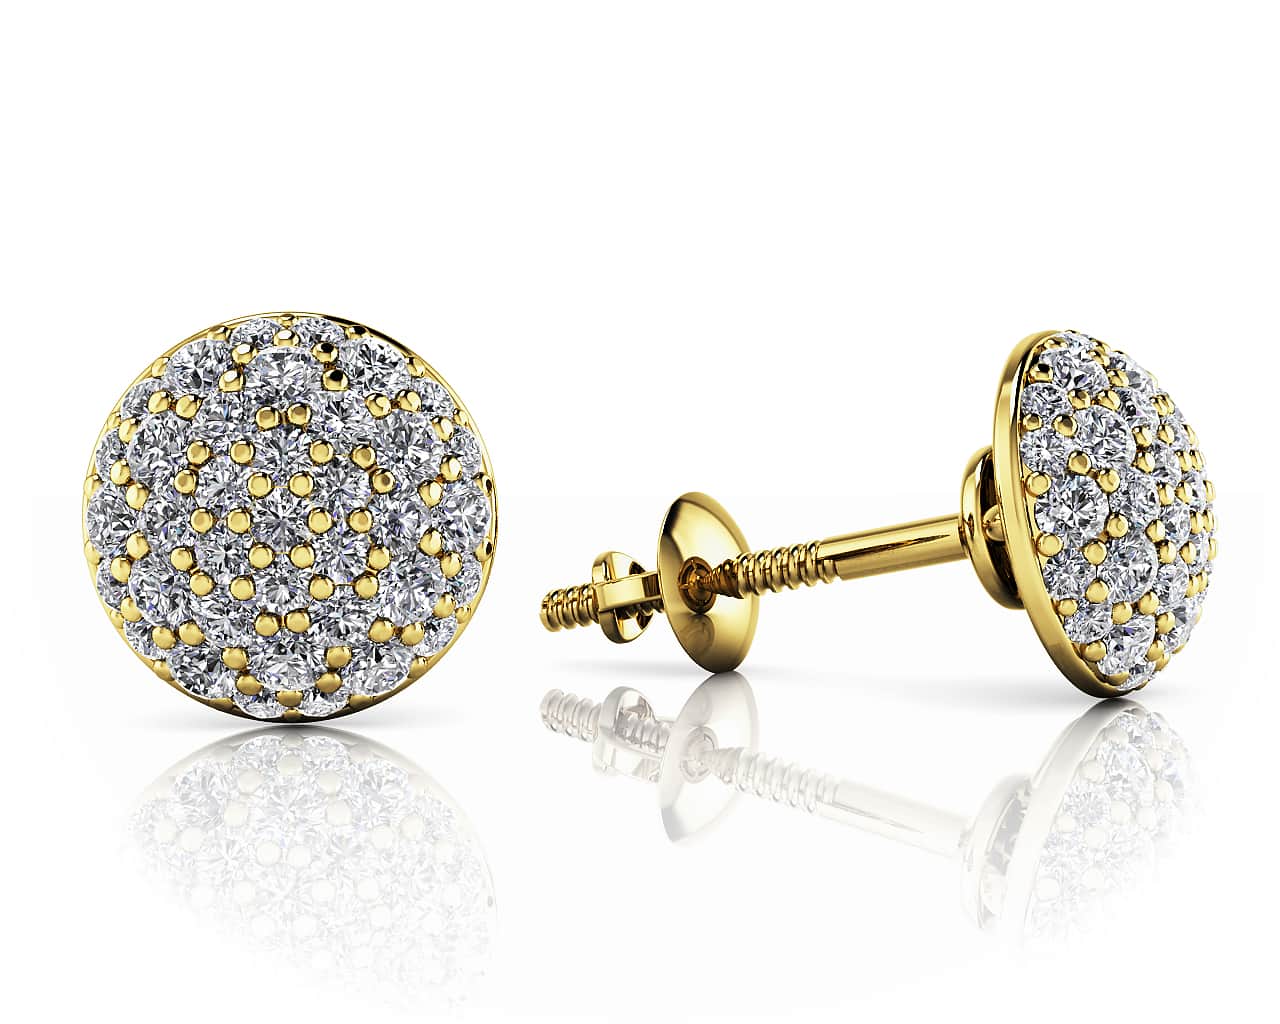 Pave Set Diamond Earrings 1/2 Carat Total Weight